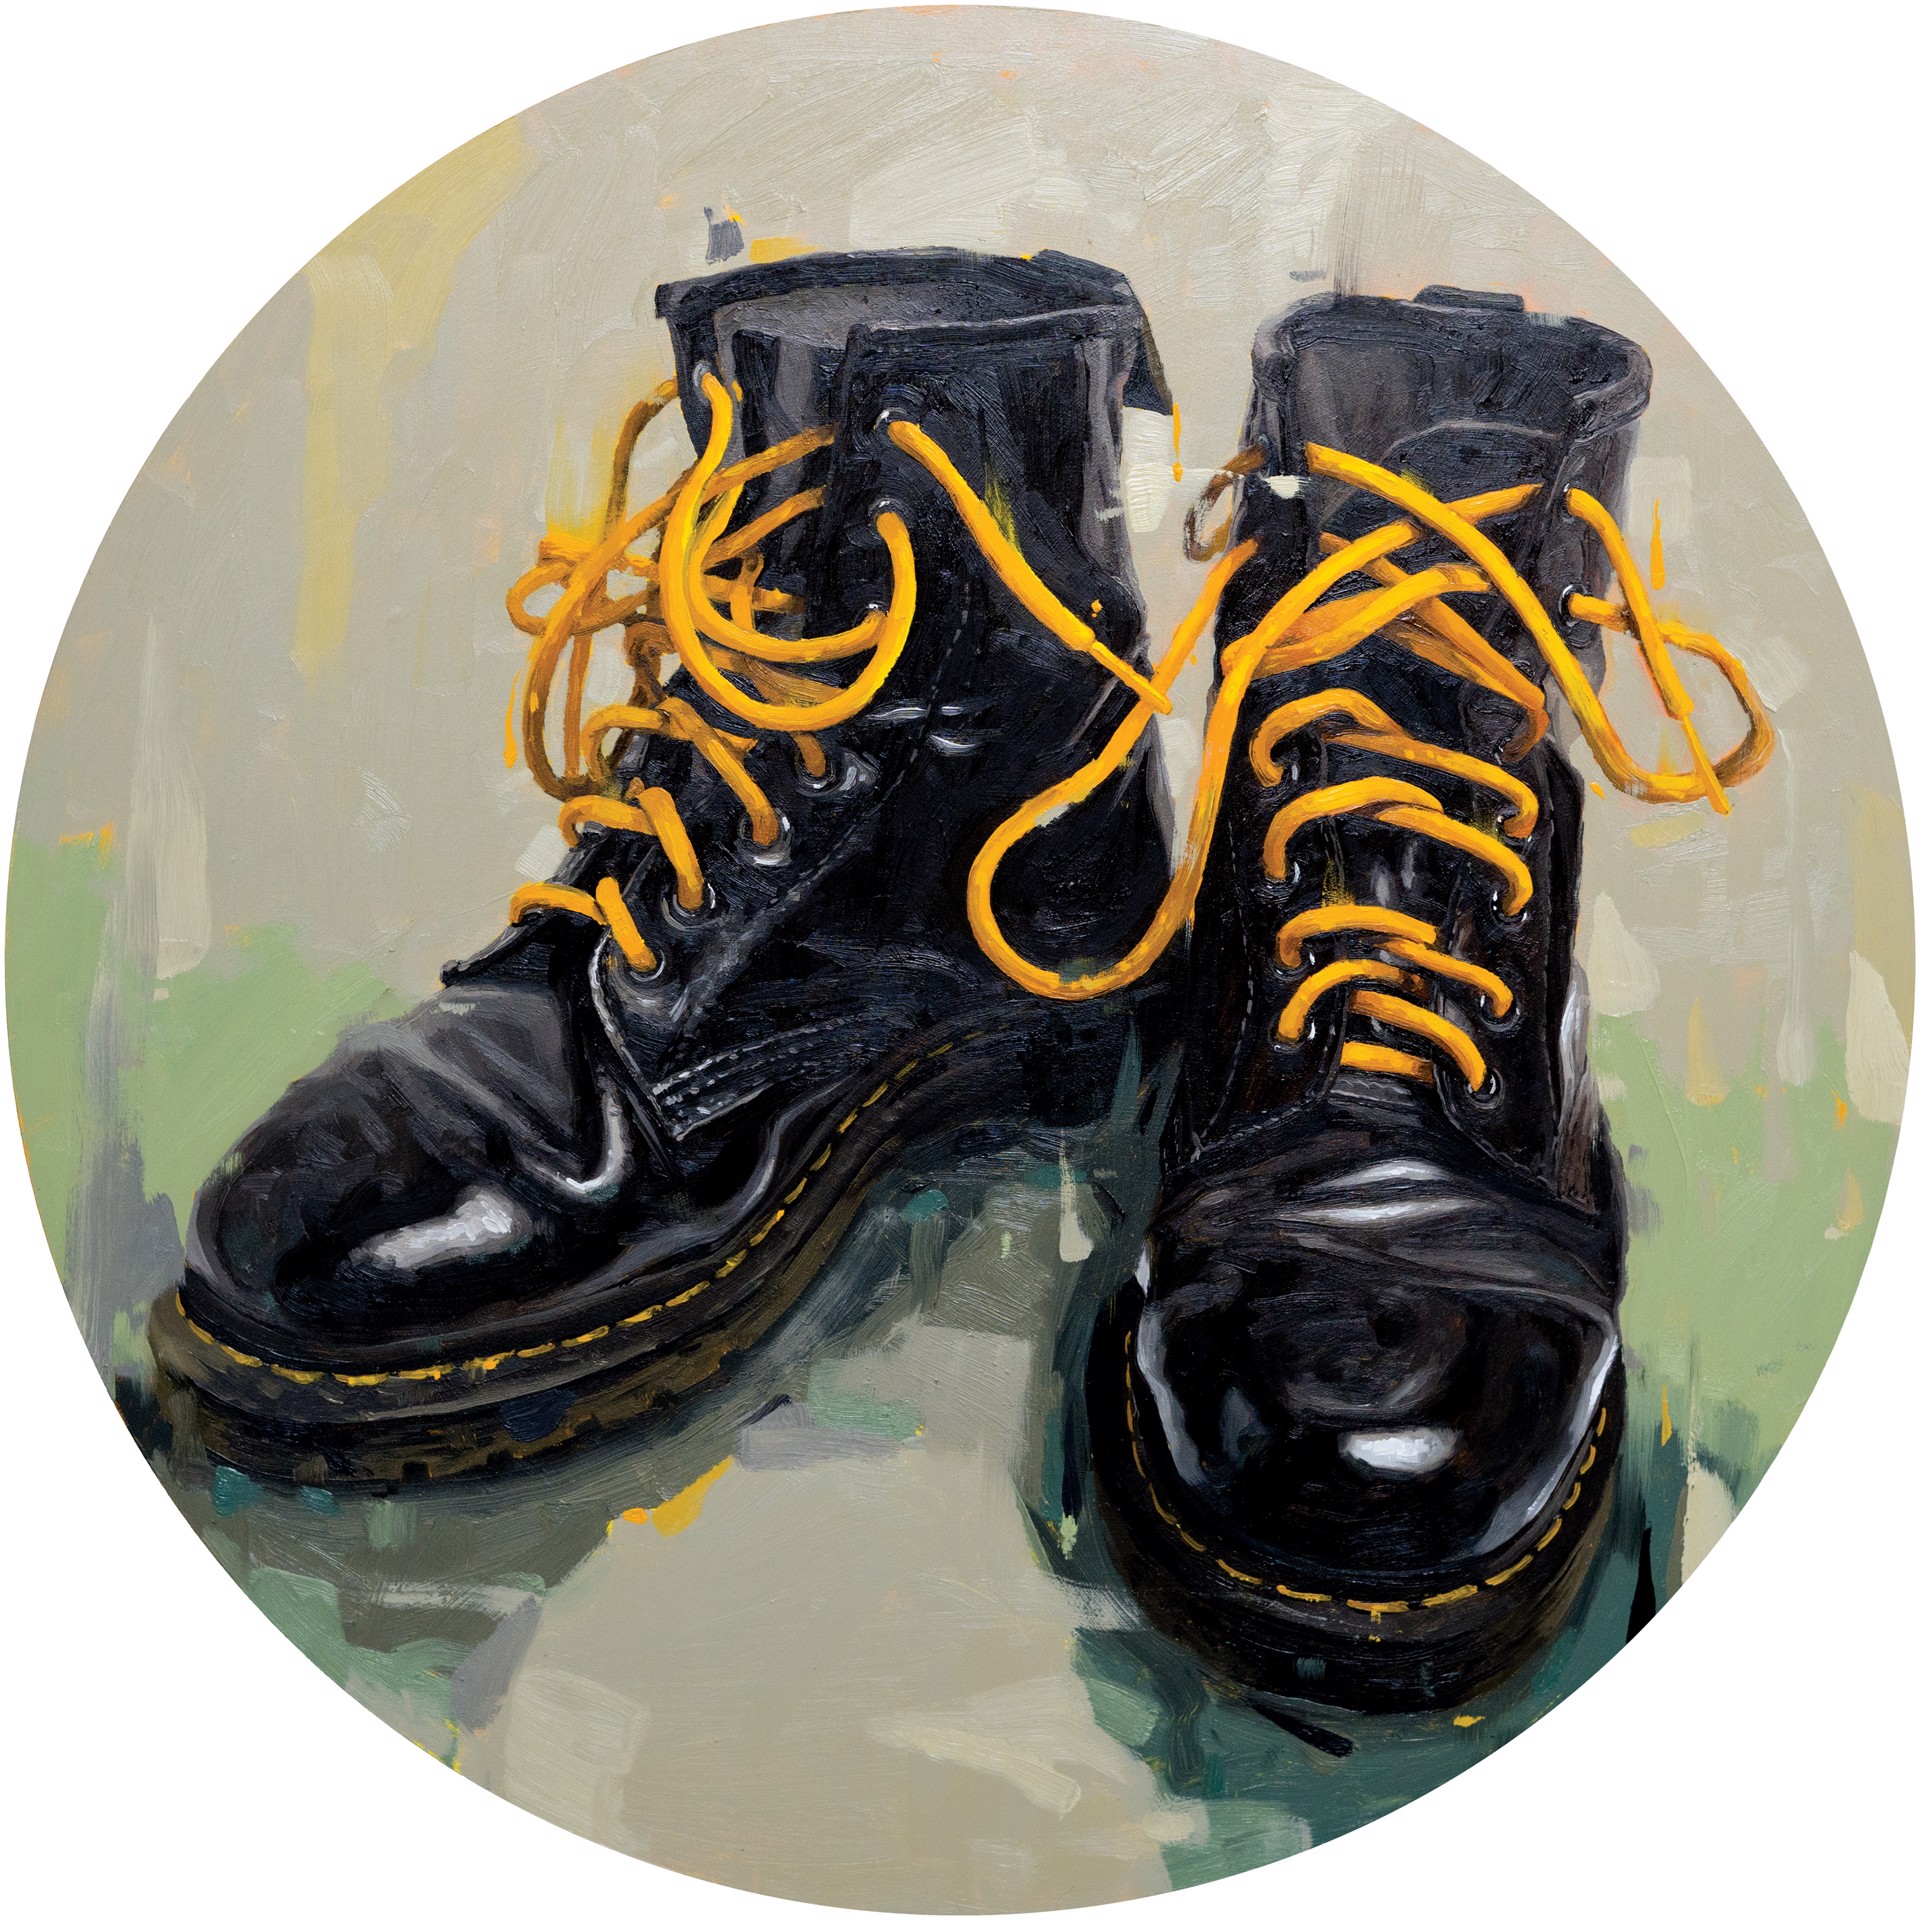 Black DM's 'Yellow Laces' by Oliver Winconek